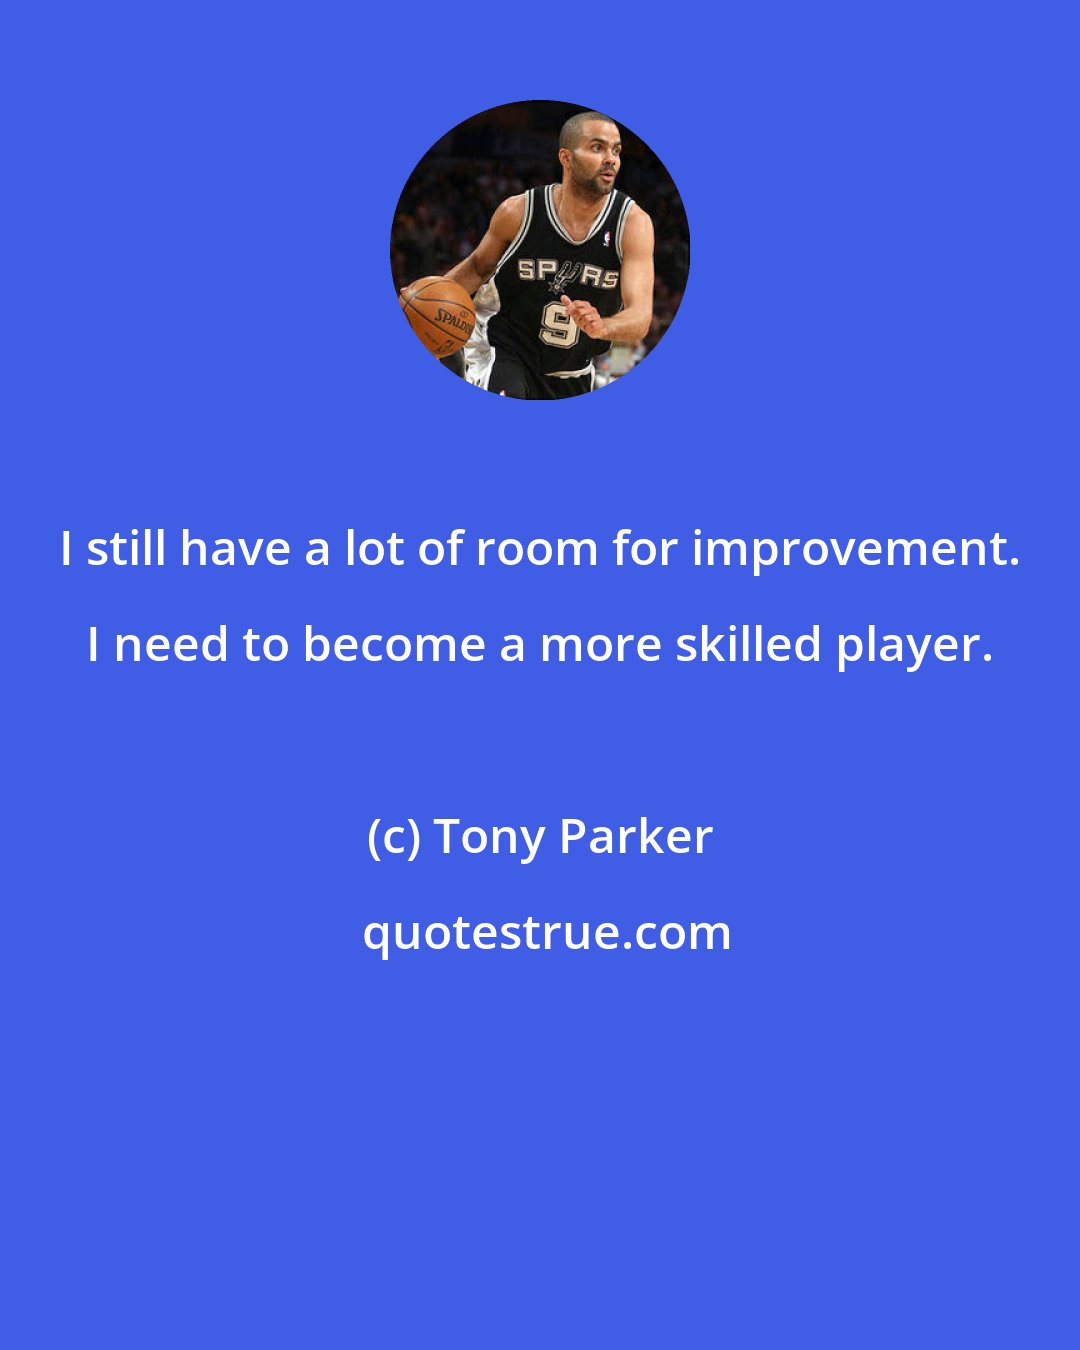 Tony Parker: I still have a lot of room for improvement. I need to become a more skilled player.